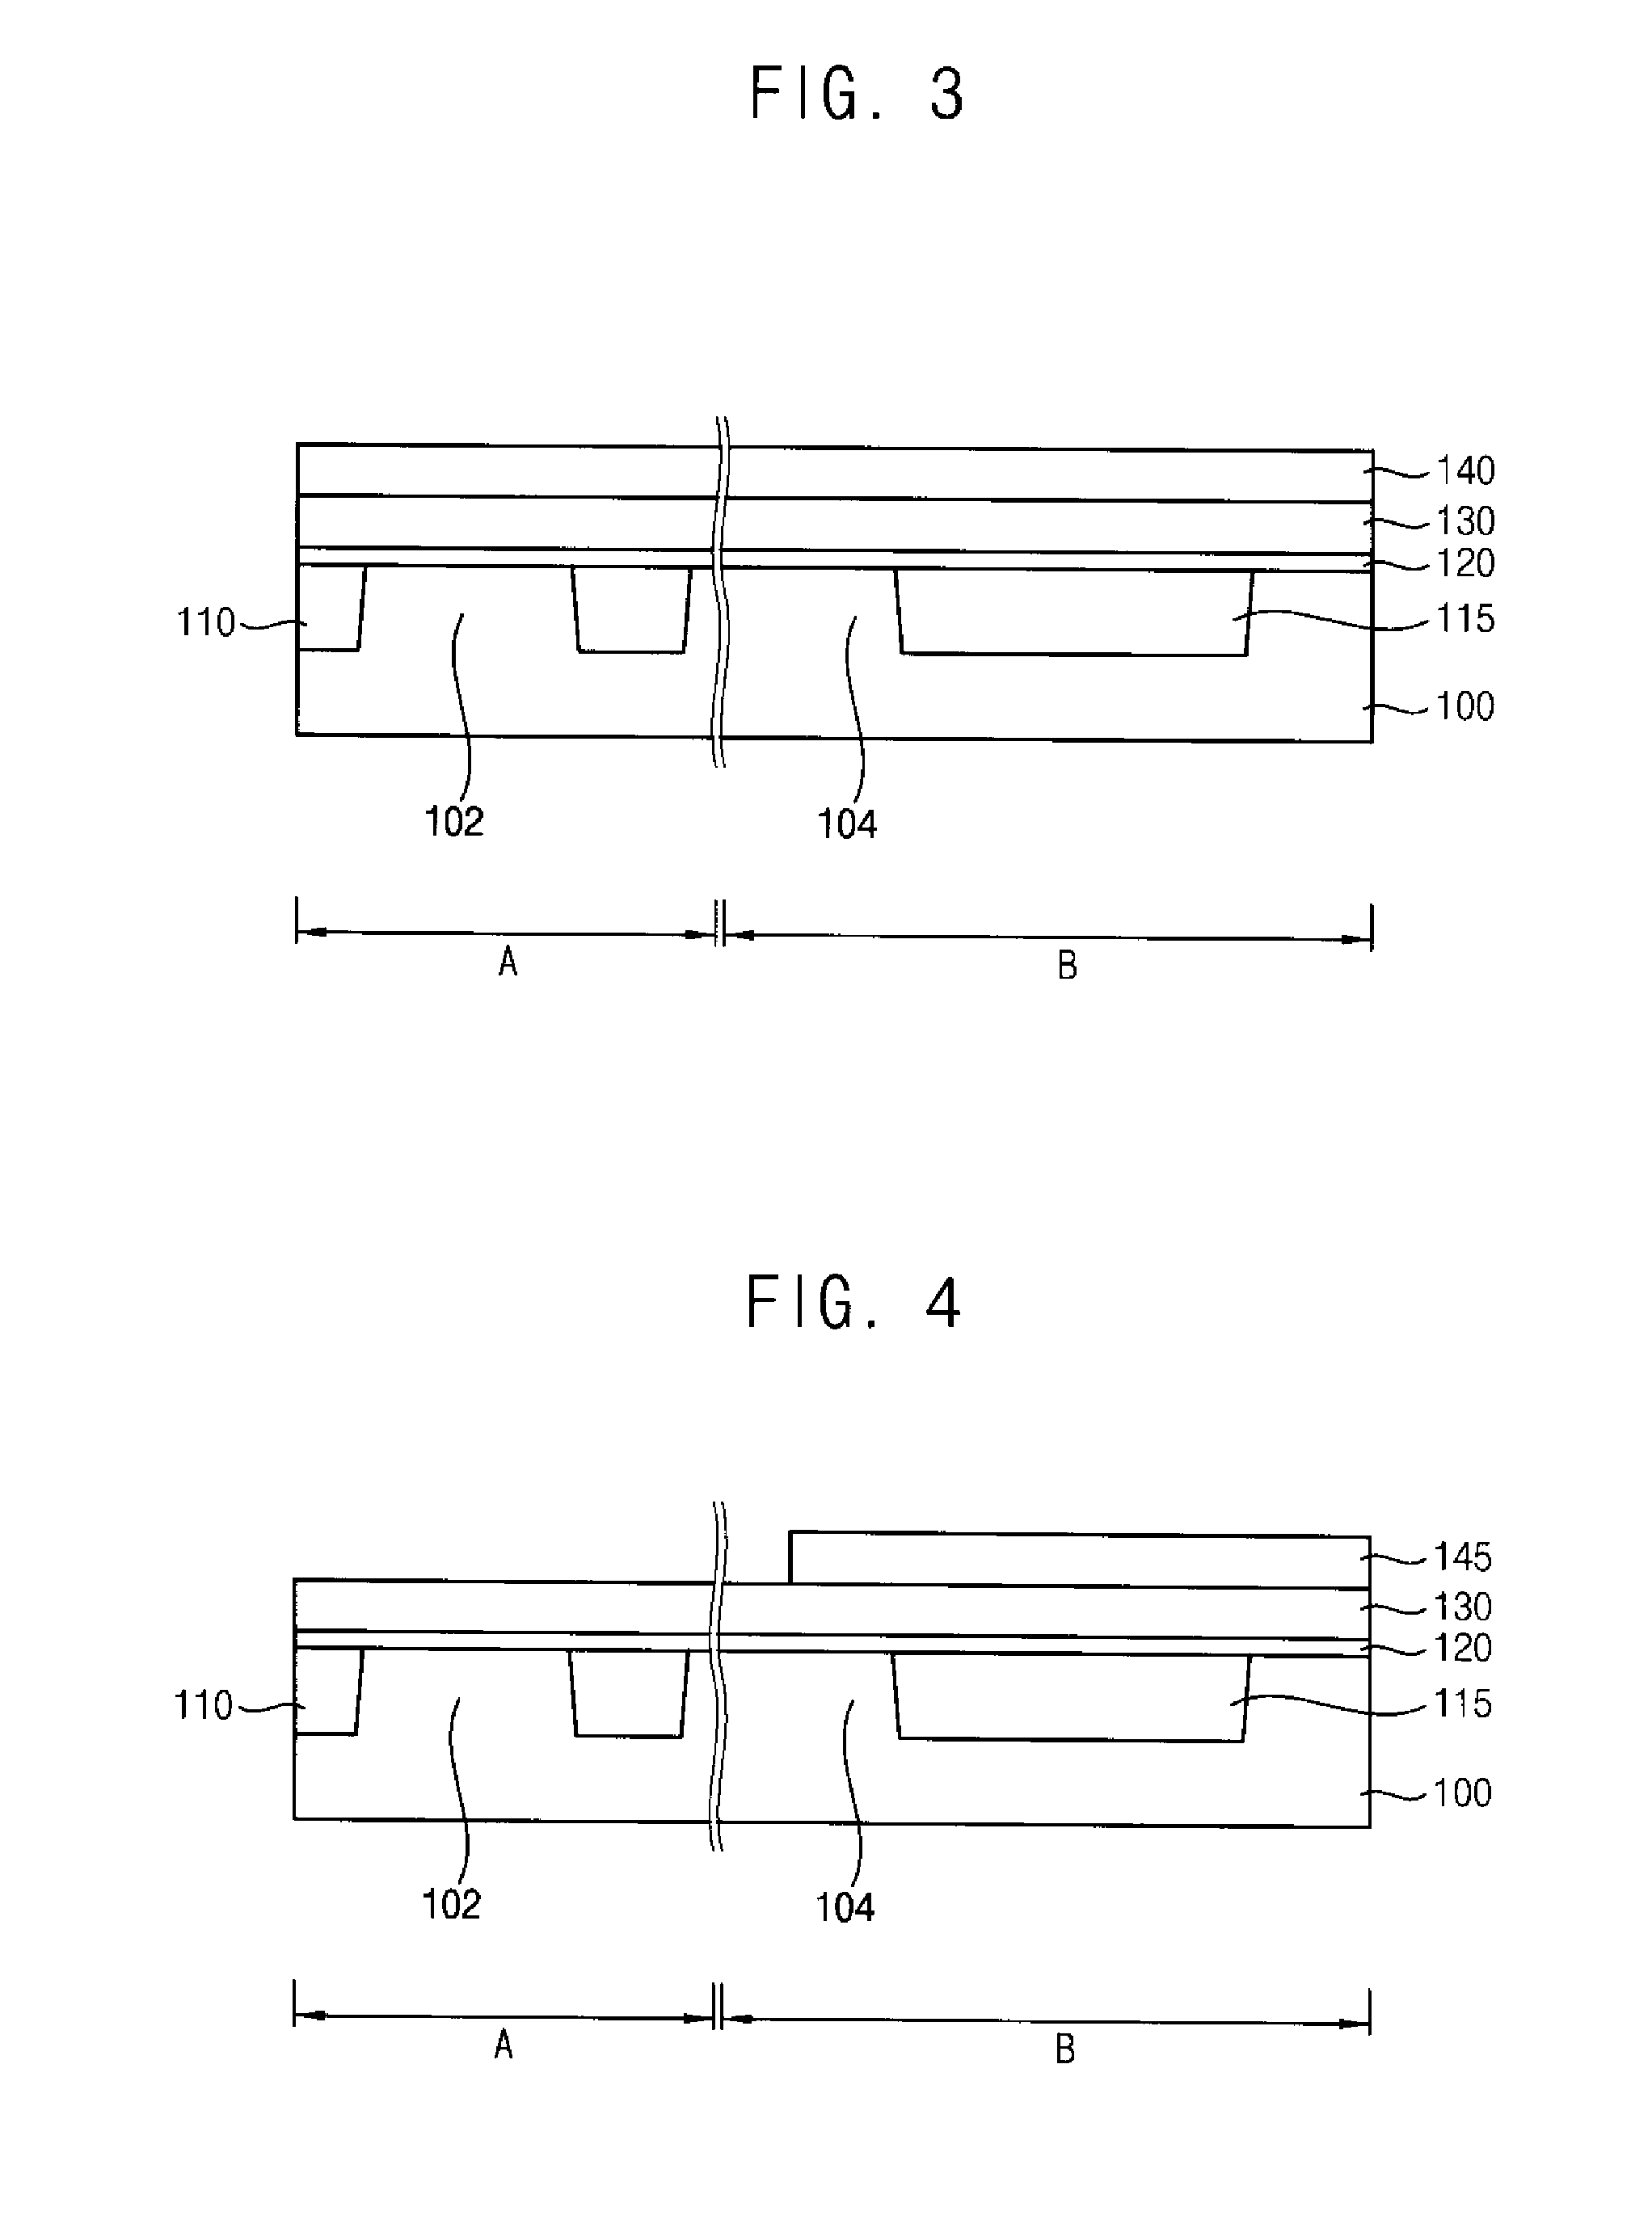 Semiconductor apparatus including an optical device and an electronic device, and method of manufacturing the same